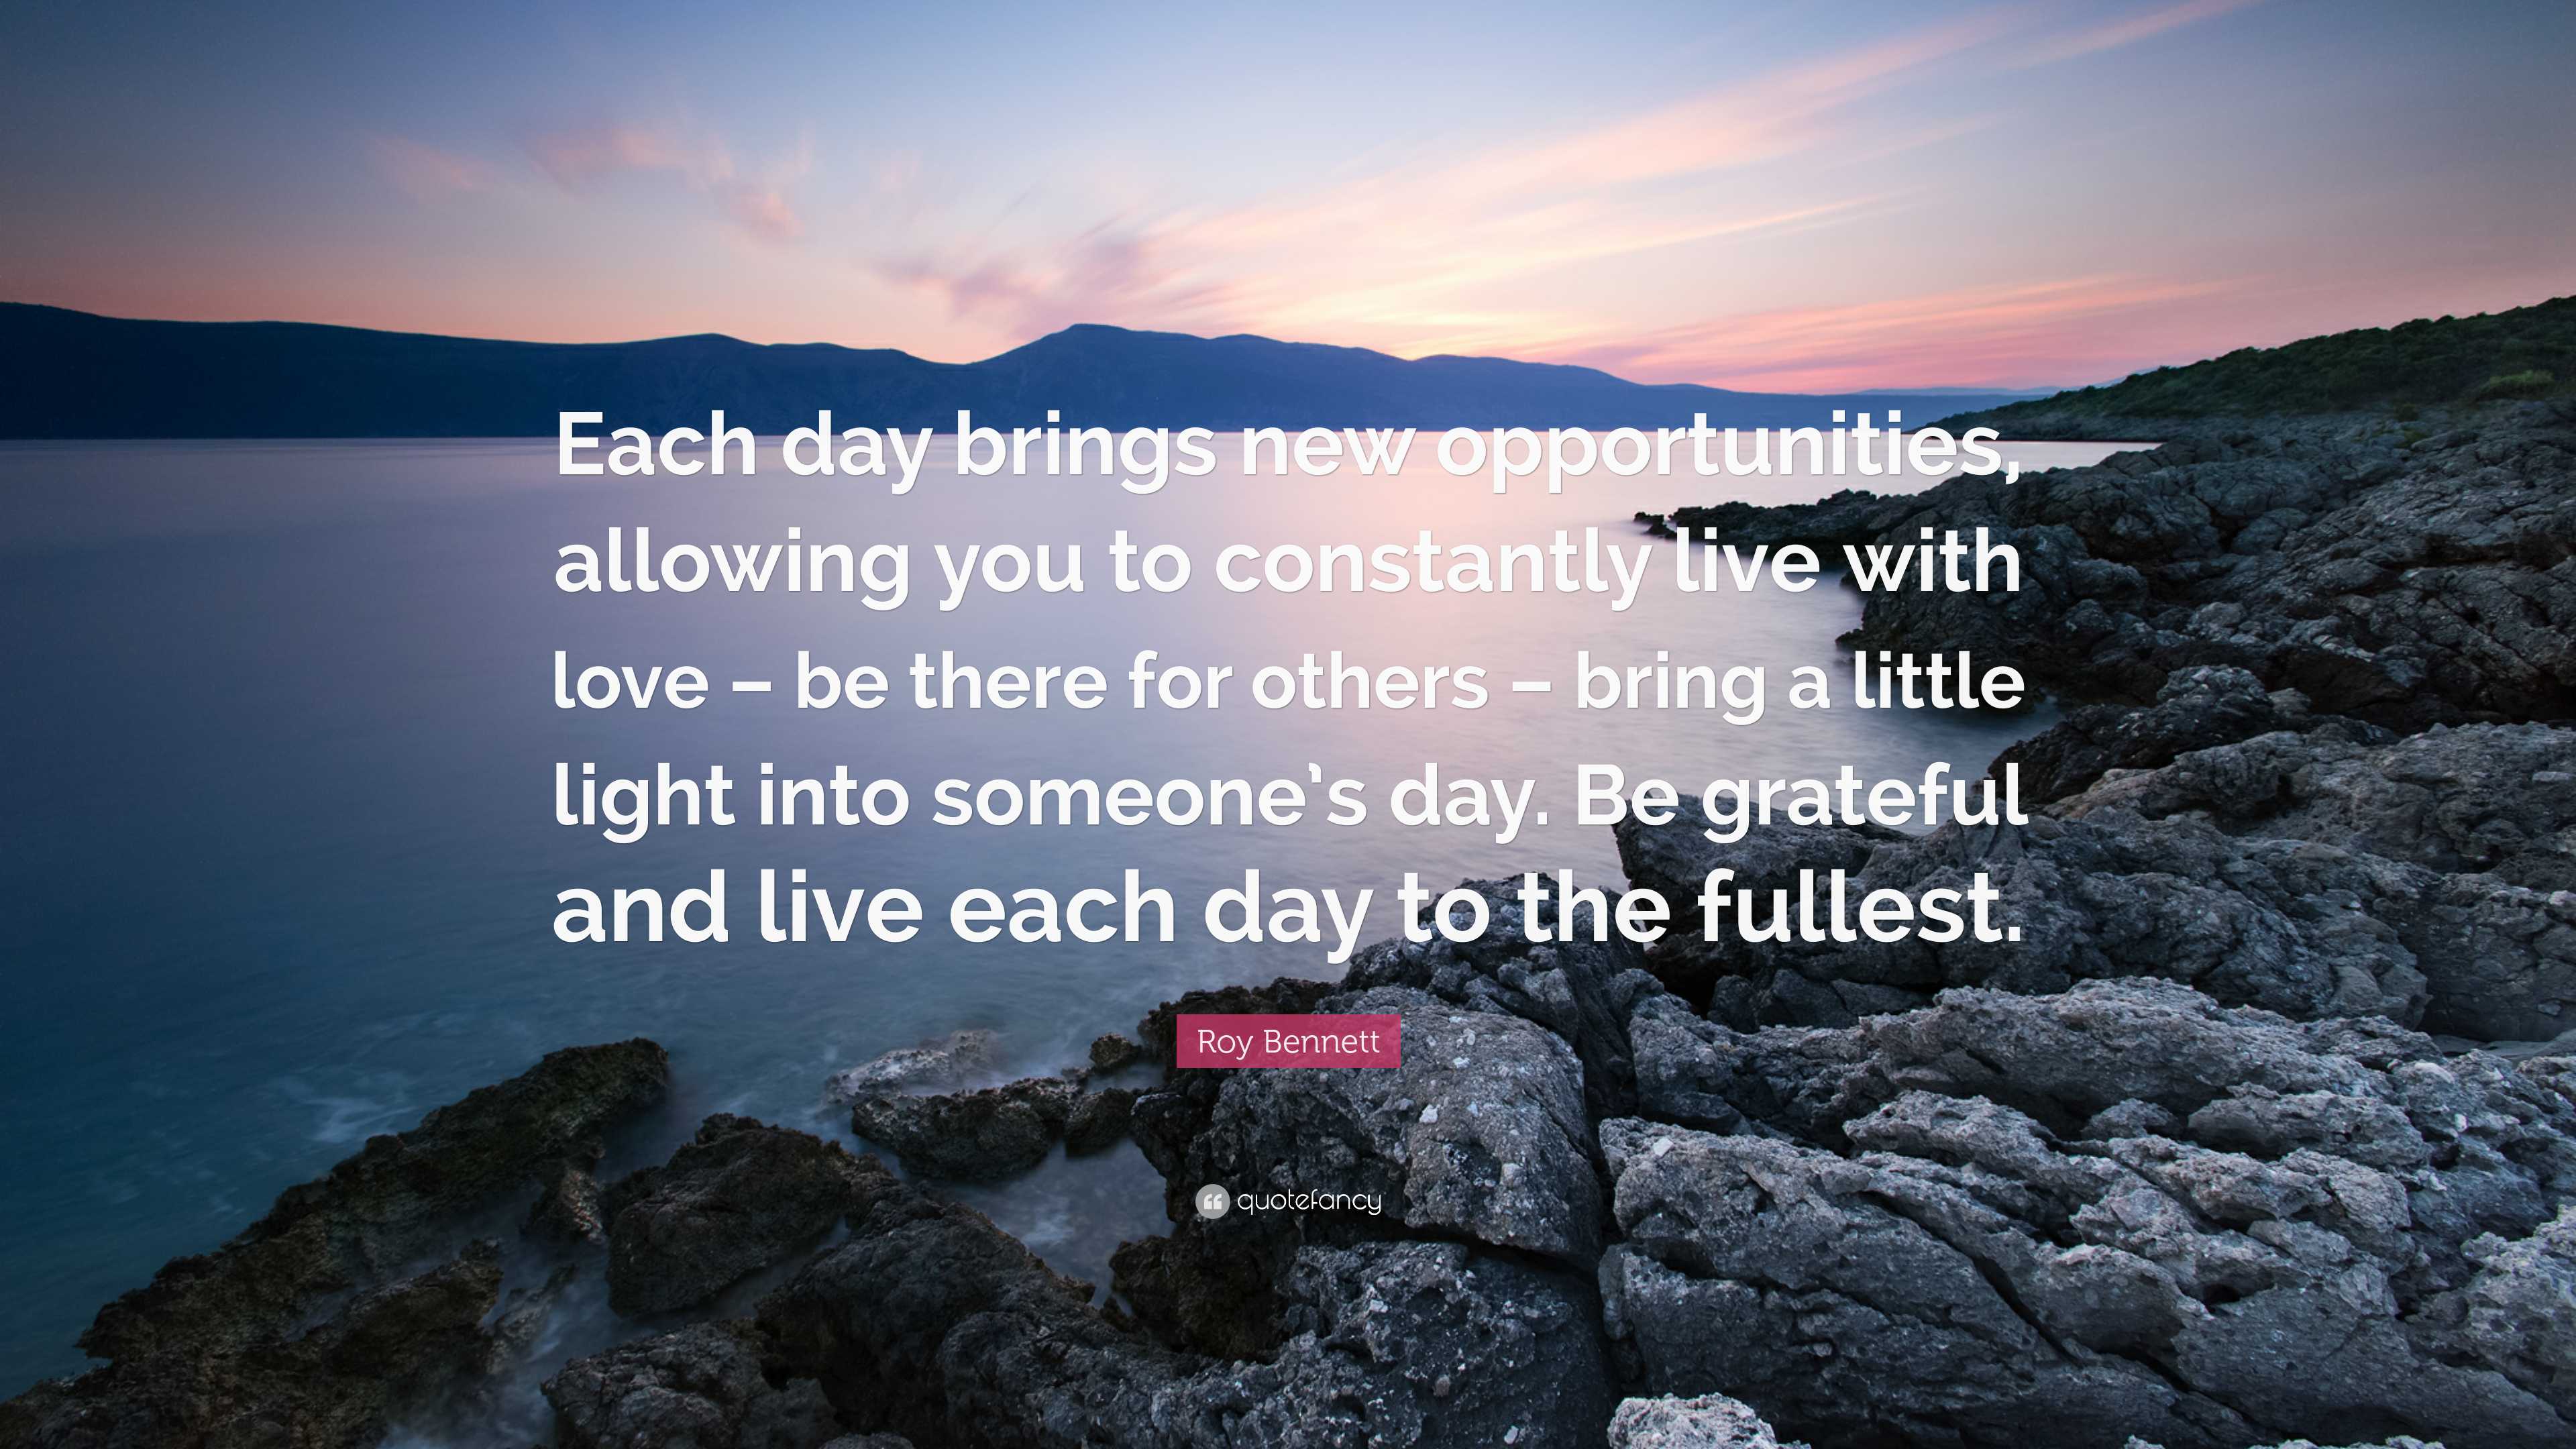 Embrace and cherish each day. #inspiration #quotes #life #love